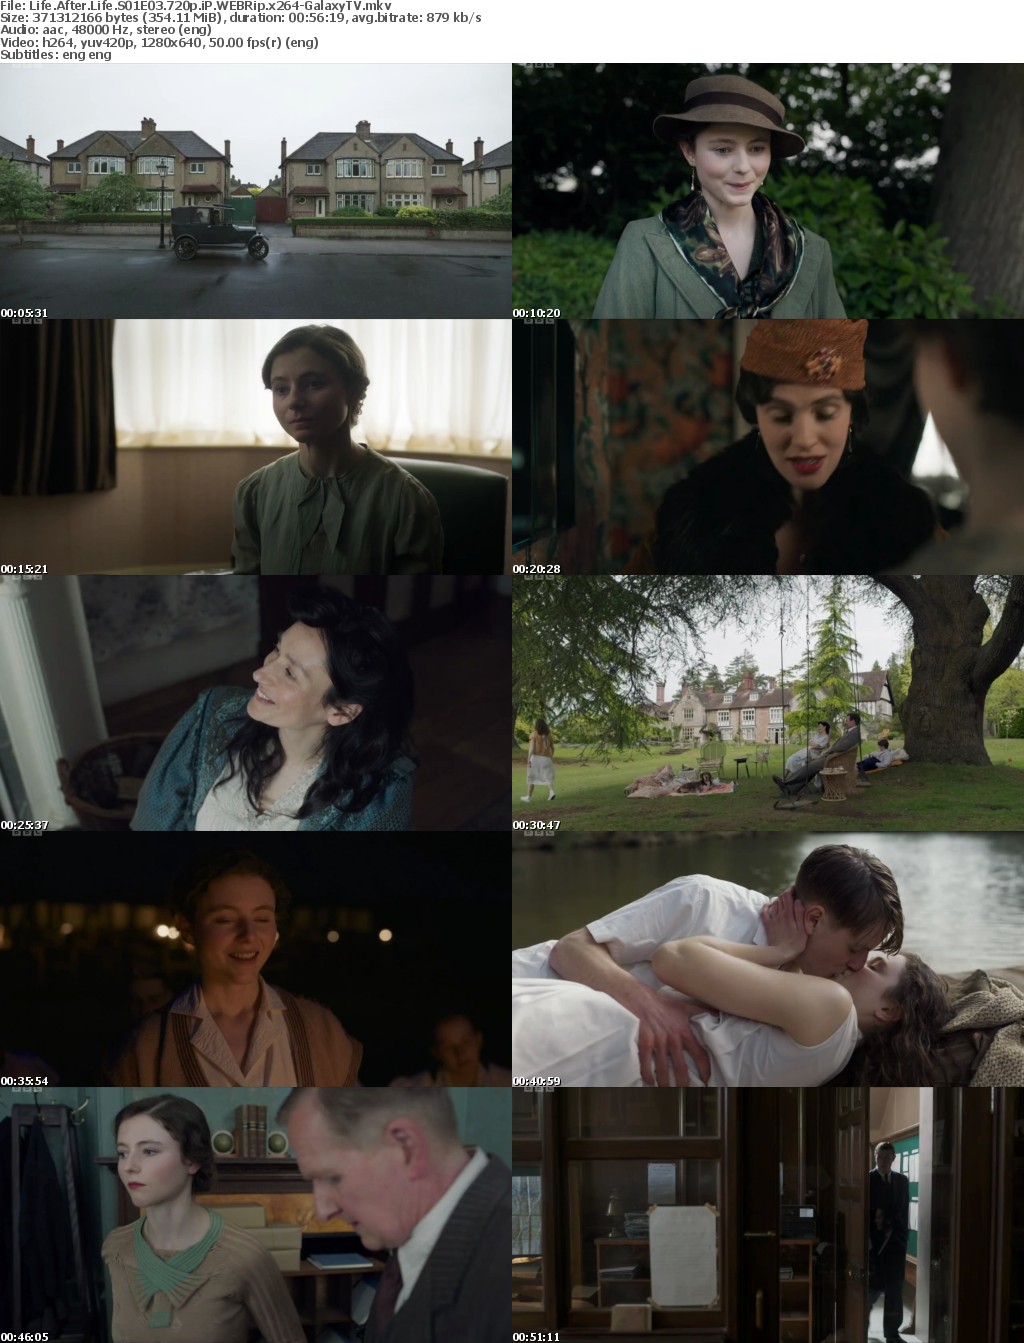 Life After Life S01 COMPLETE 720p iP WEBRip x264-GalaxyTV